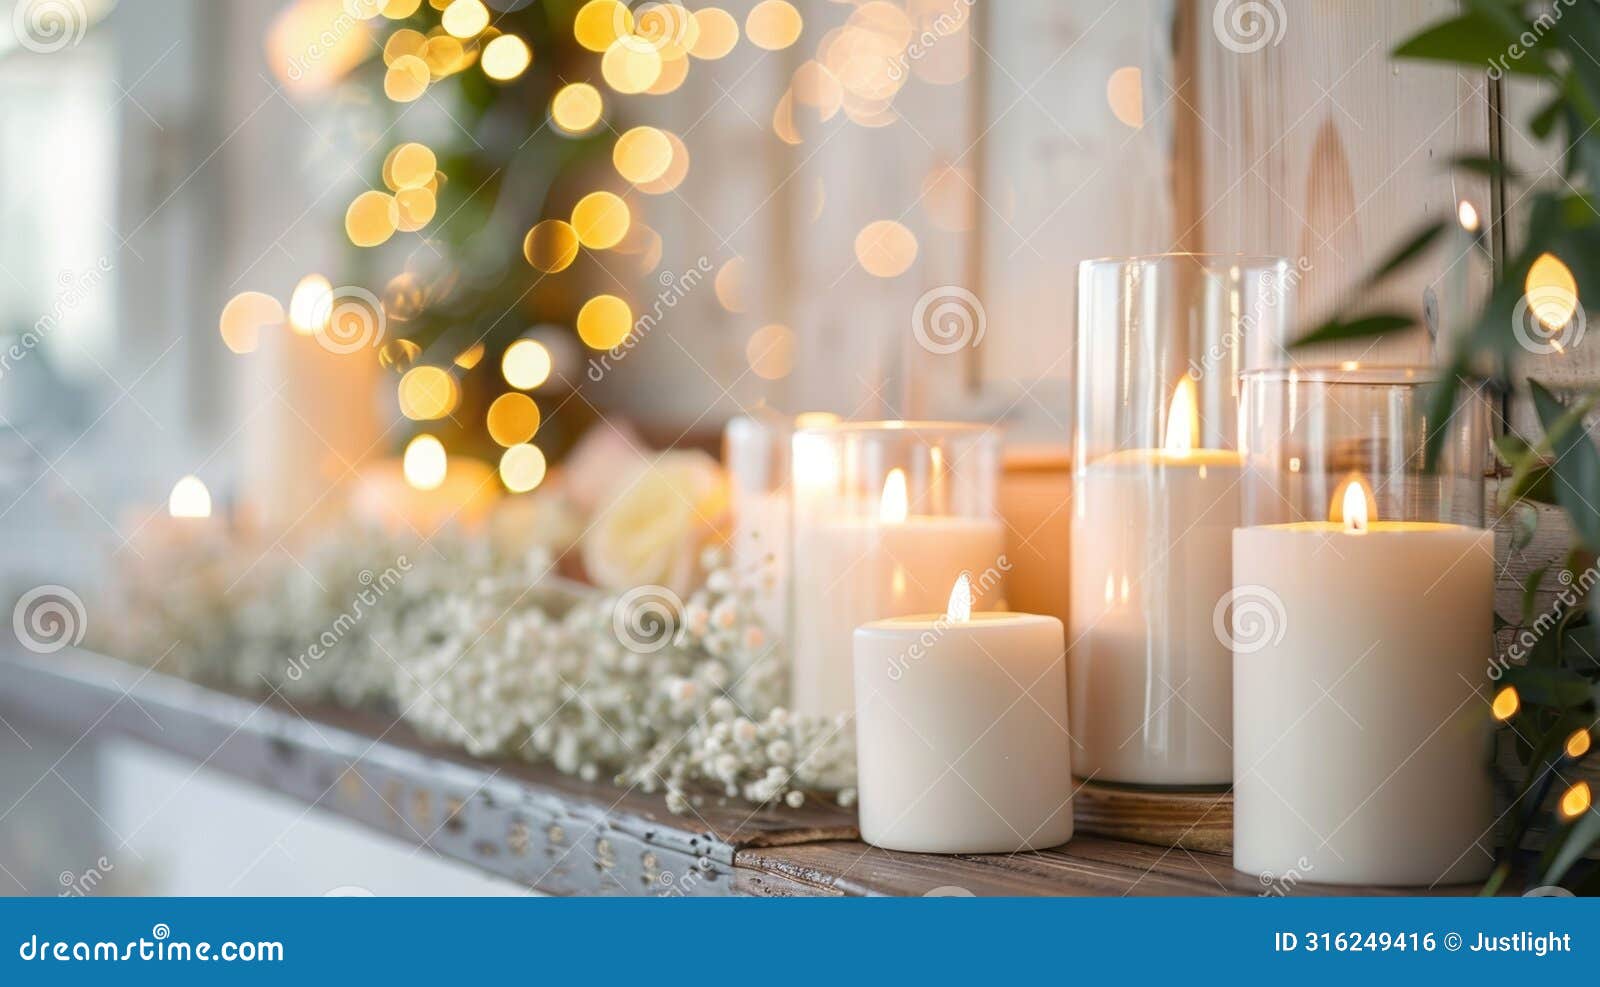 a stunning display of a sp mantle with minimalistic taper candles adding a touch of warmth and ambiance. 2d flat cartoon